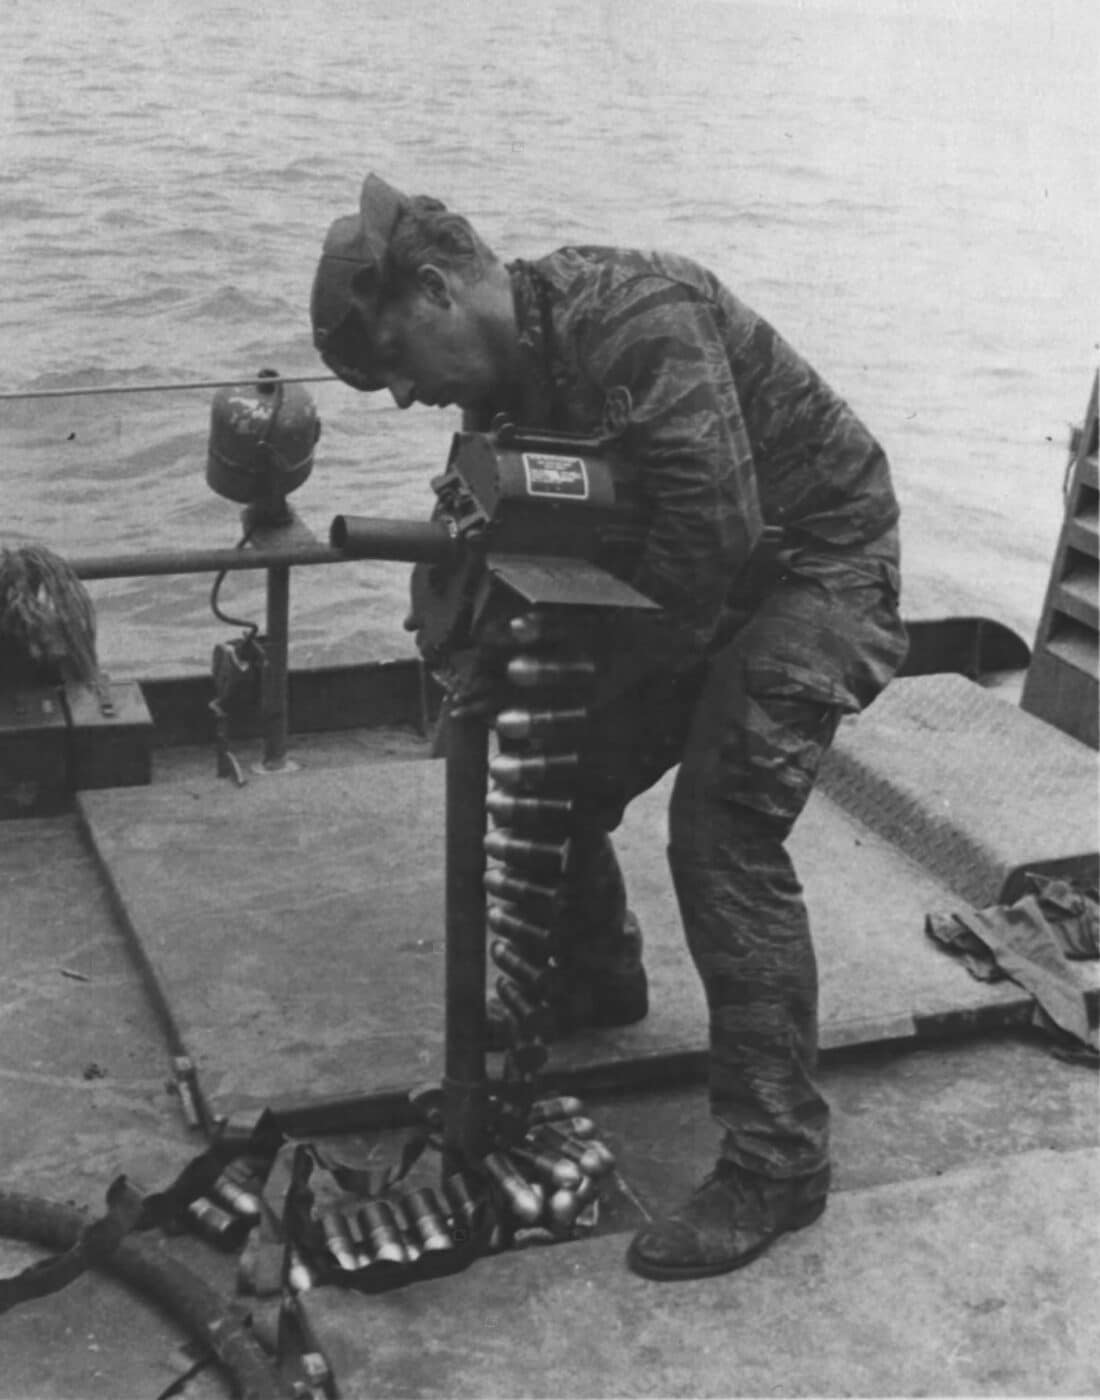 Shown is a American Navy sailor in a Tiger Strip pattern camo uniform loading a Mk18 Mod0 grenade launcher. The U.S. Navy SEALs used them on Patrol Craft Fast (PCF) boats (also known as Swift Boats) for additional firepower when patrolling the rivers and costal areas during the Vietnam War. 